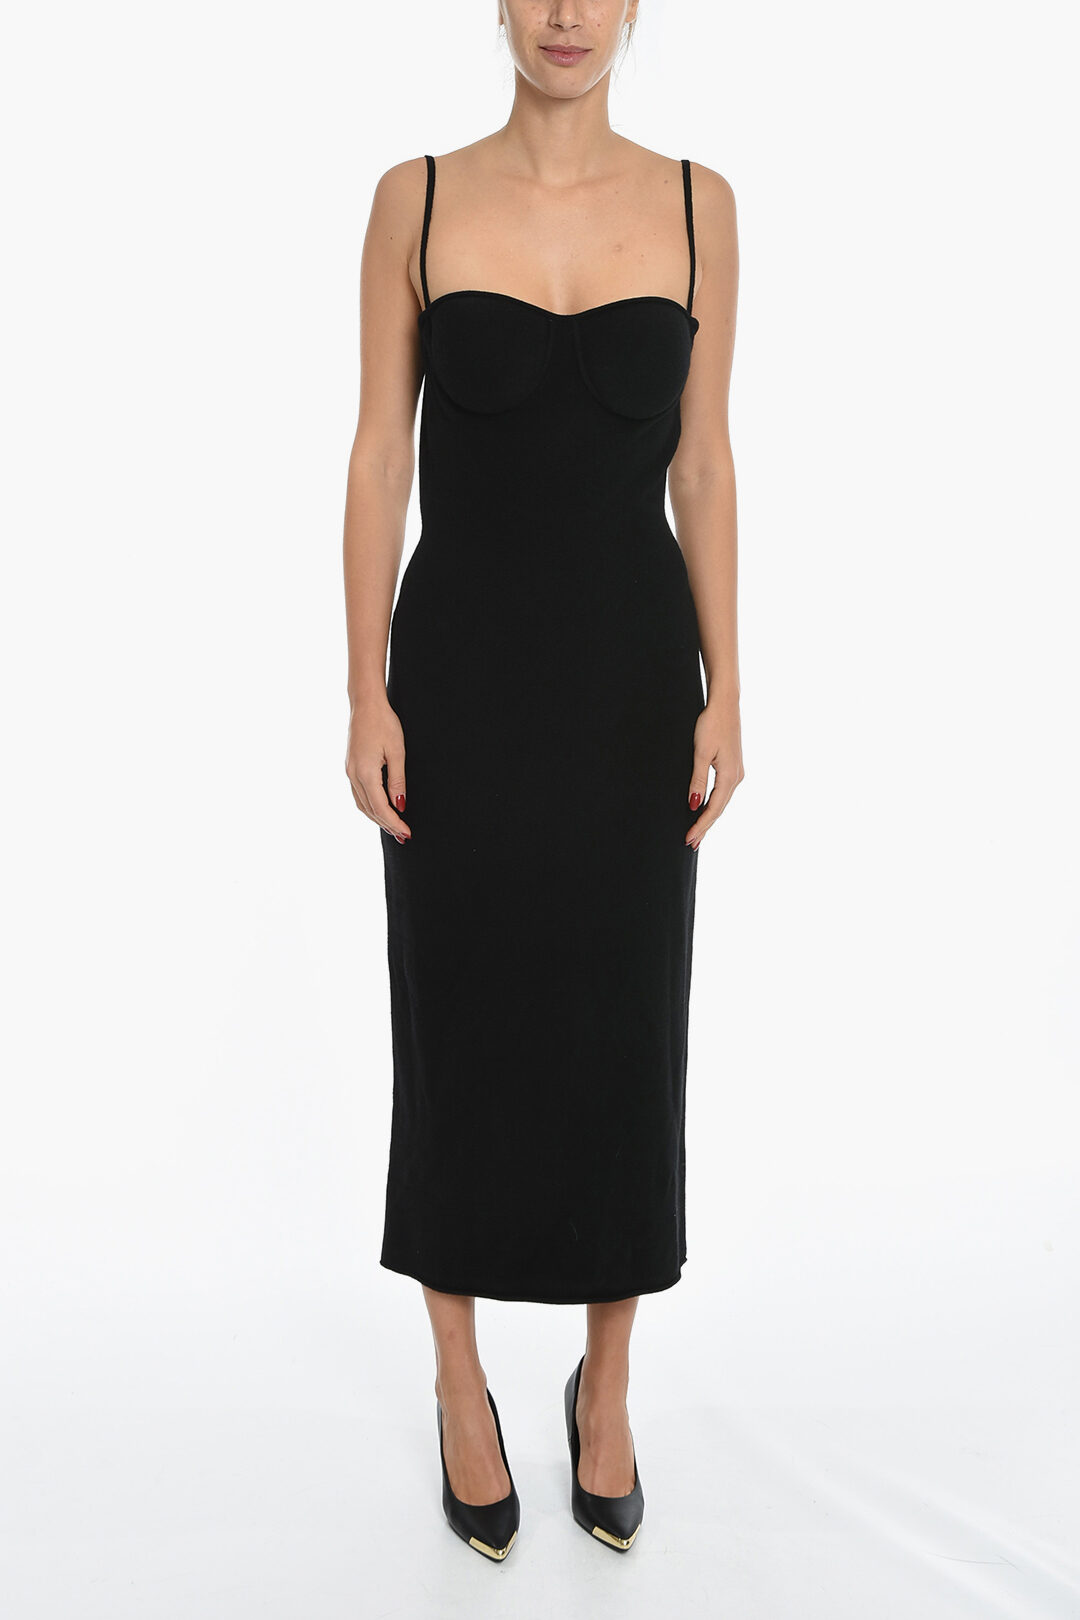 Sportmax Cashmere Blend Midi Dress With Built-In Bra women - Glamood Outlet